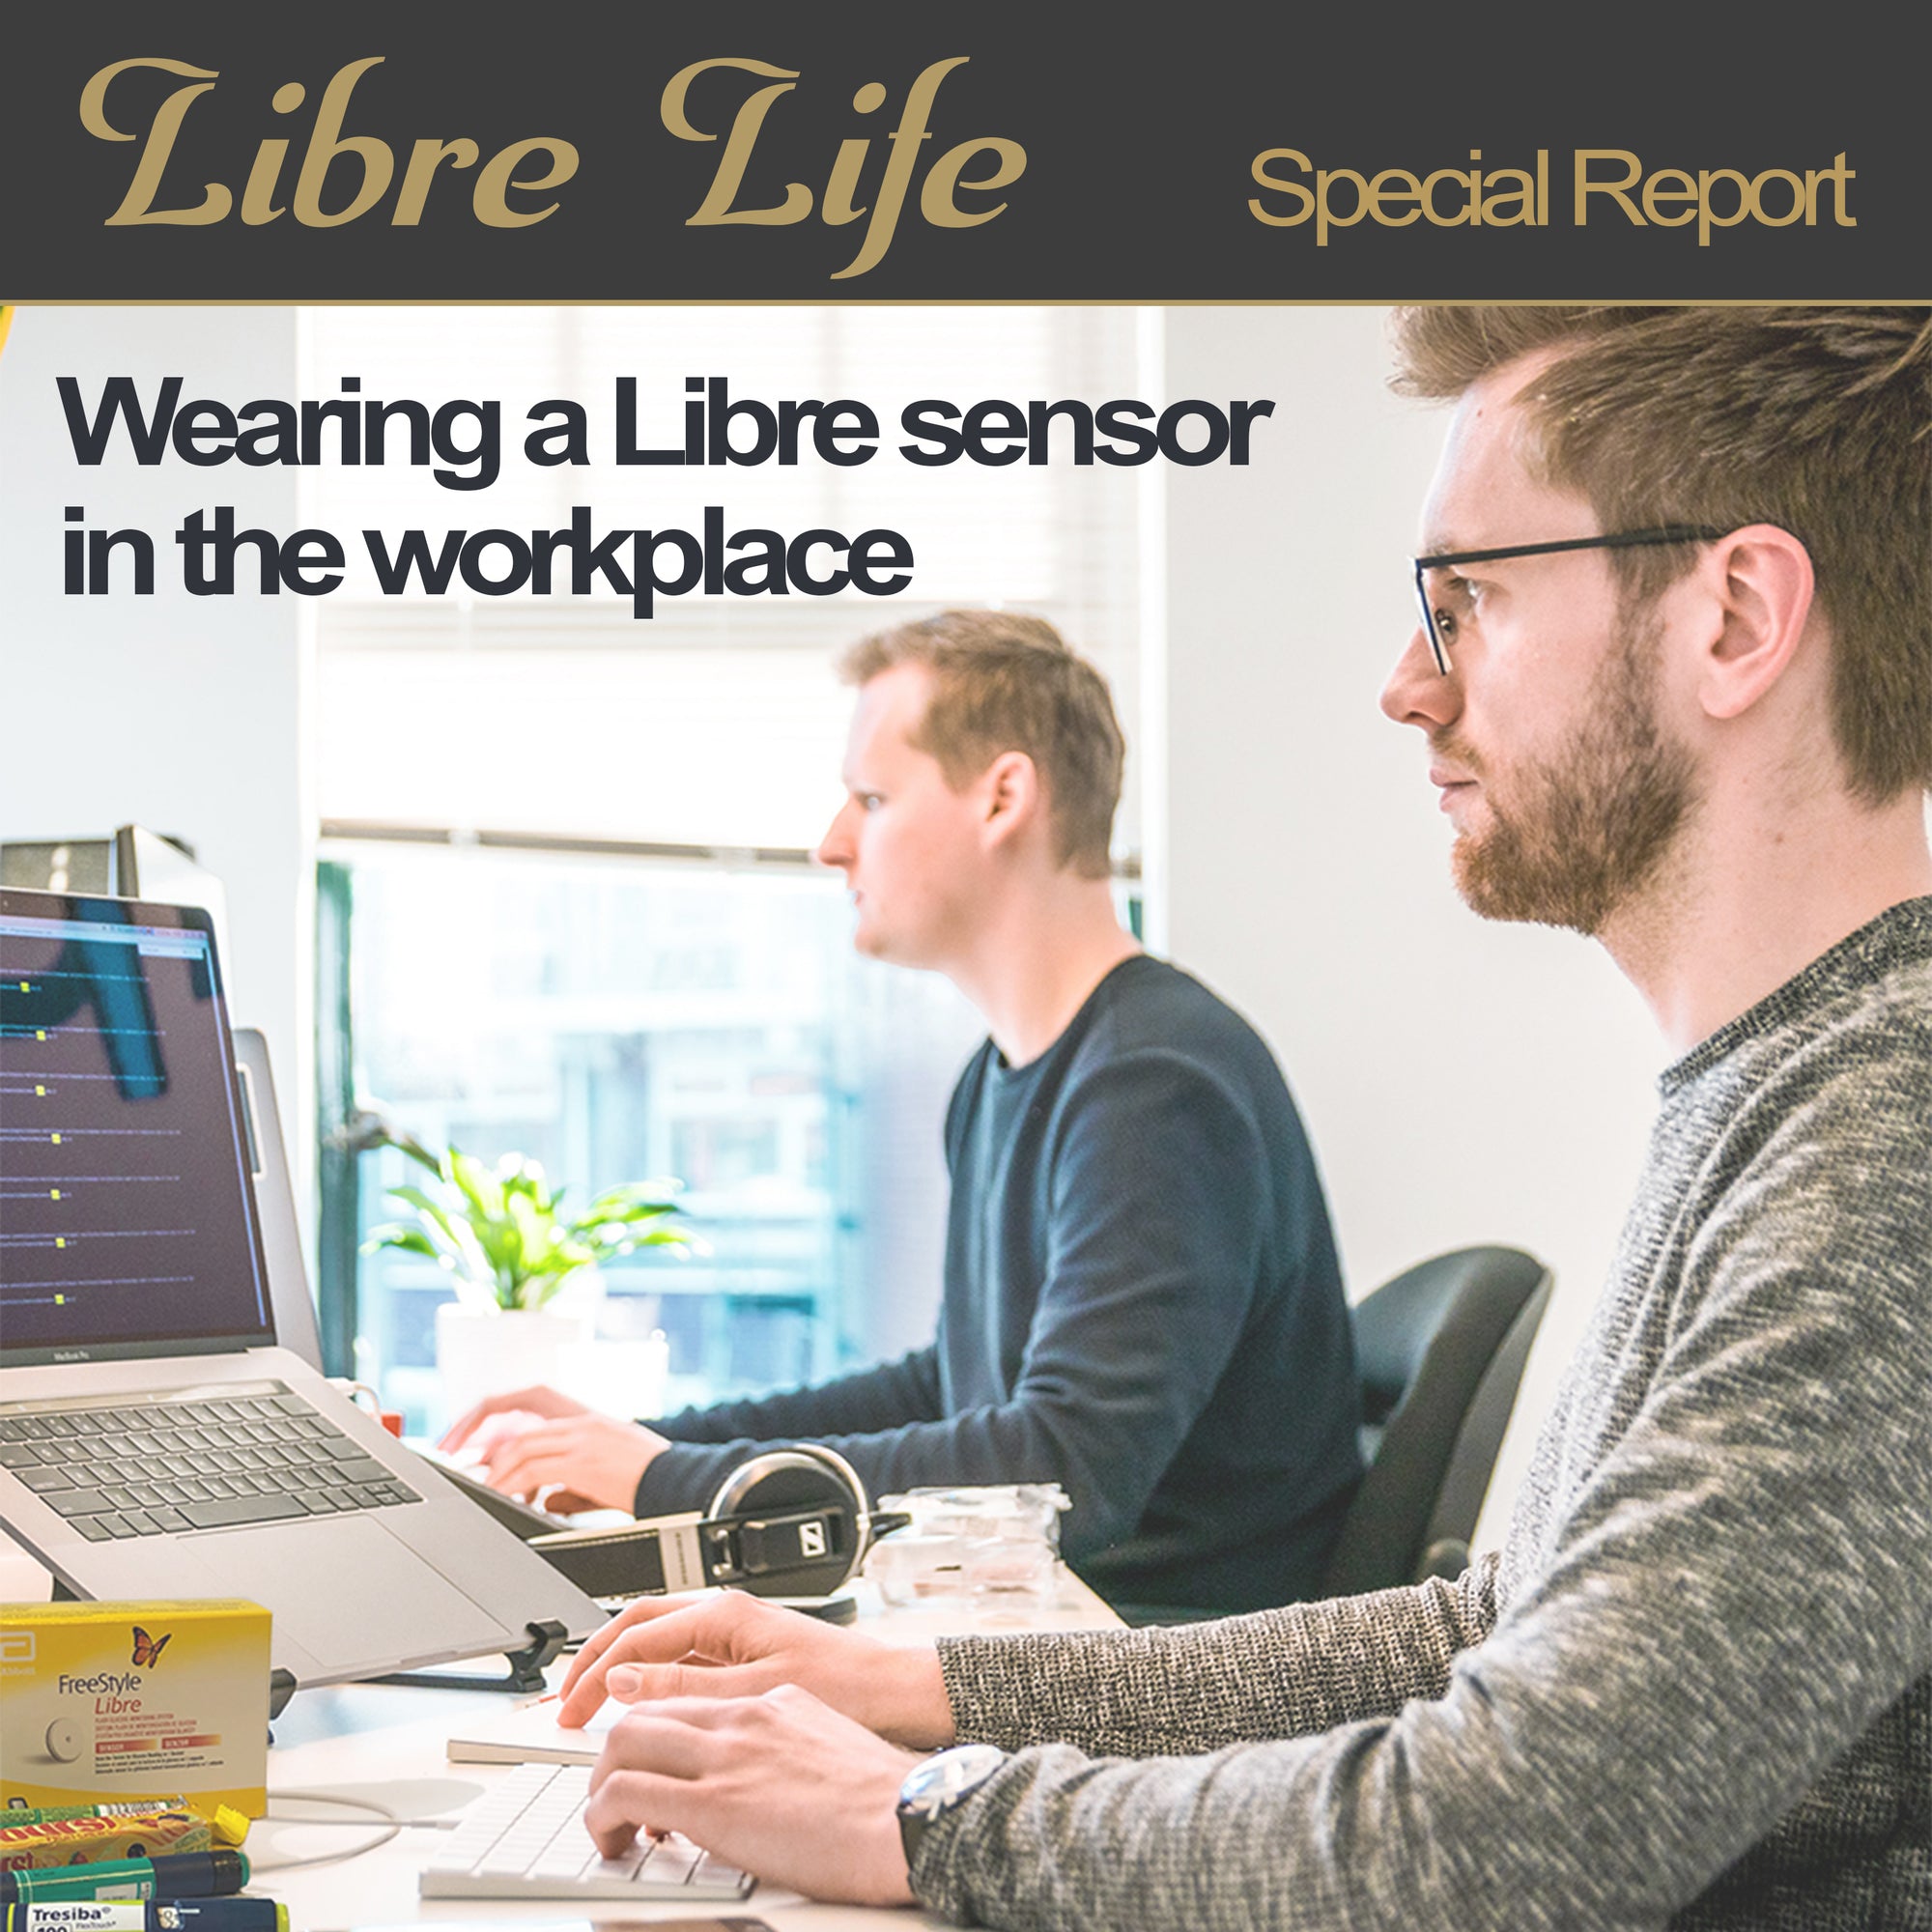 Title of Libre Life Briefing. Wearing a Libre sensor in the workplace.